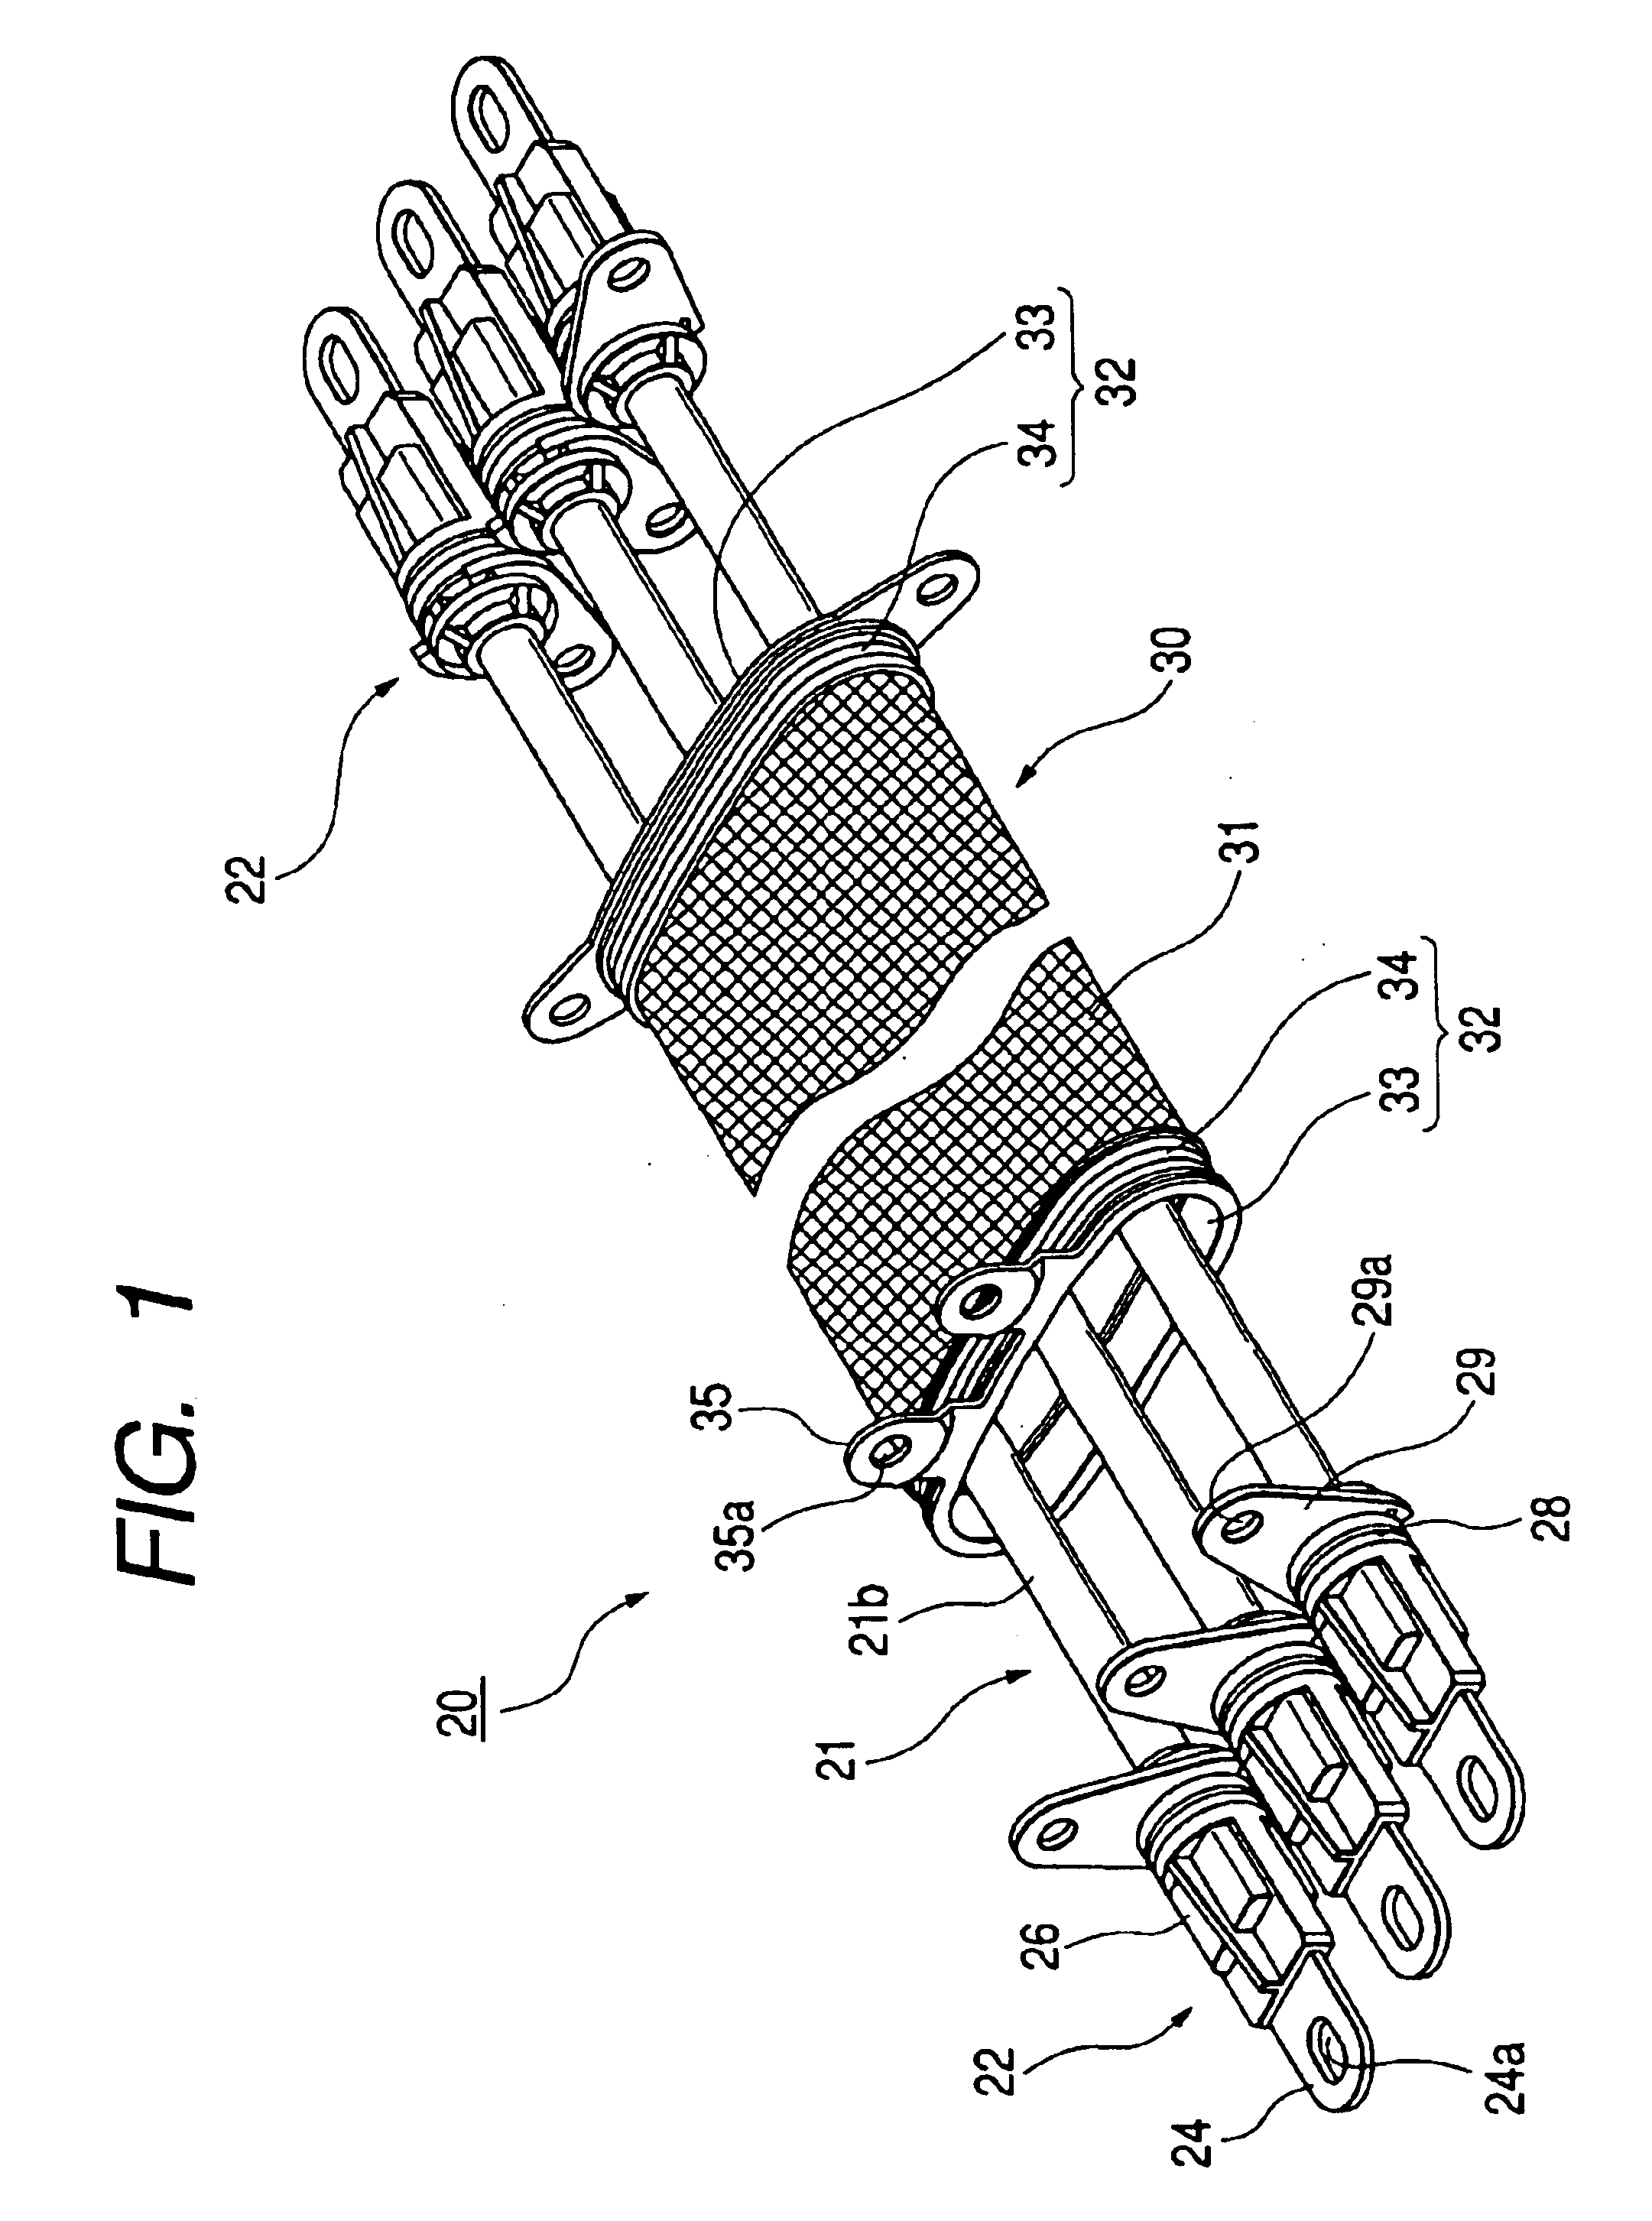 Equipment-mounting wire harness